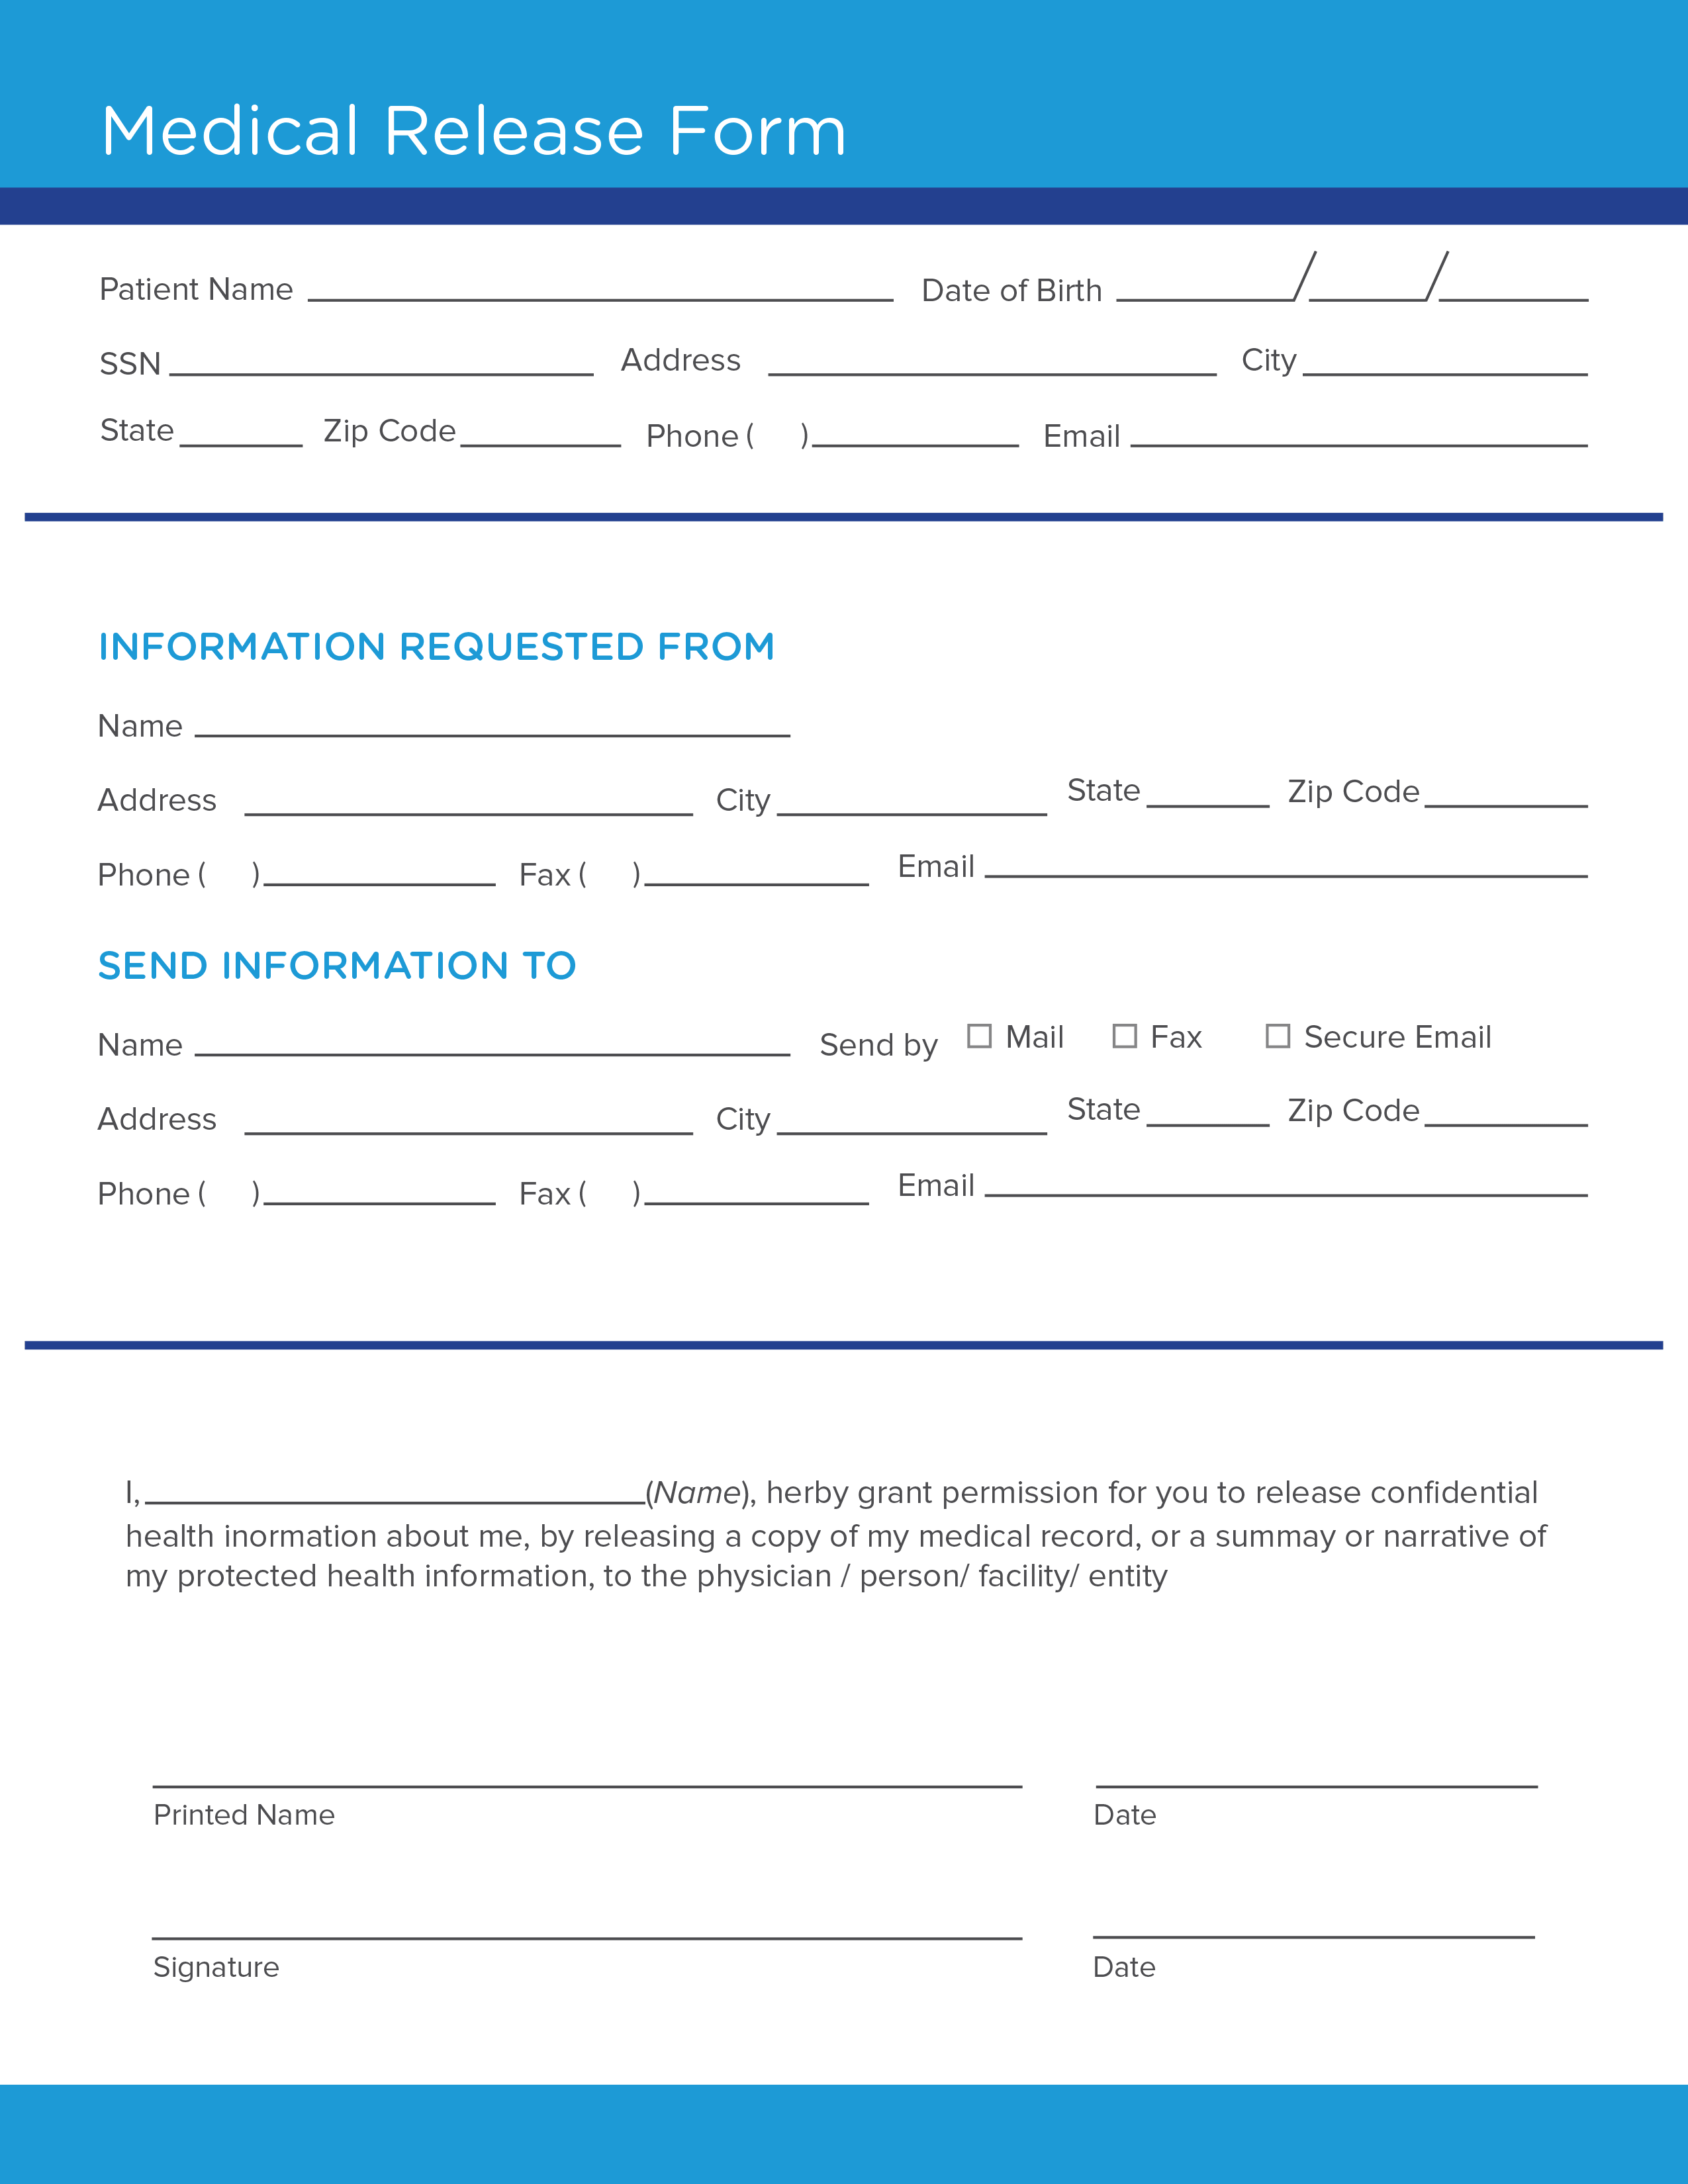 Free Medical Release Form Template - Continuum in Free Printable Medical Release Form